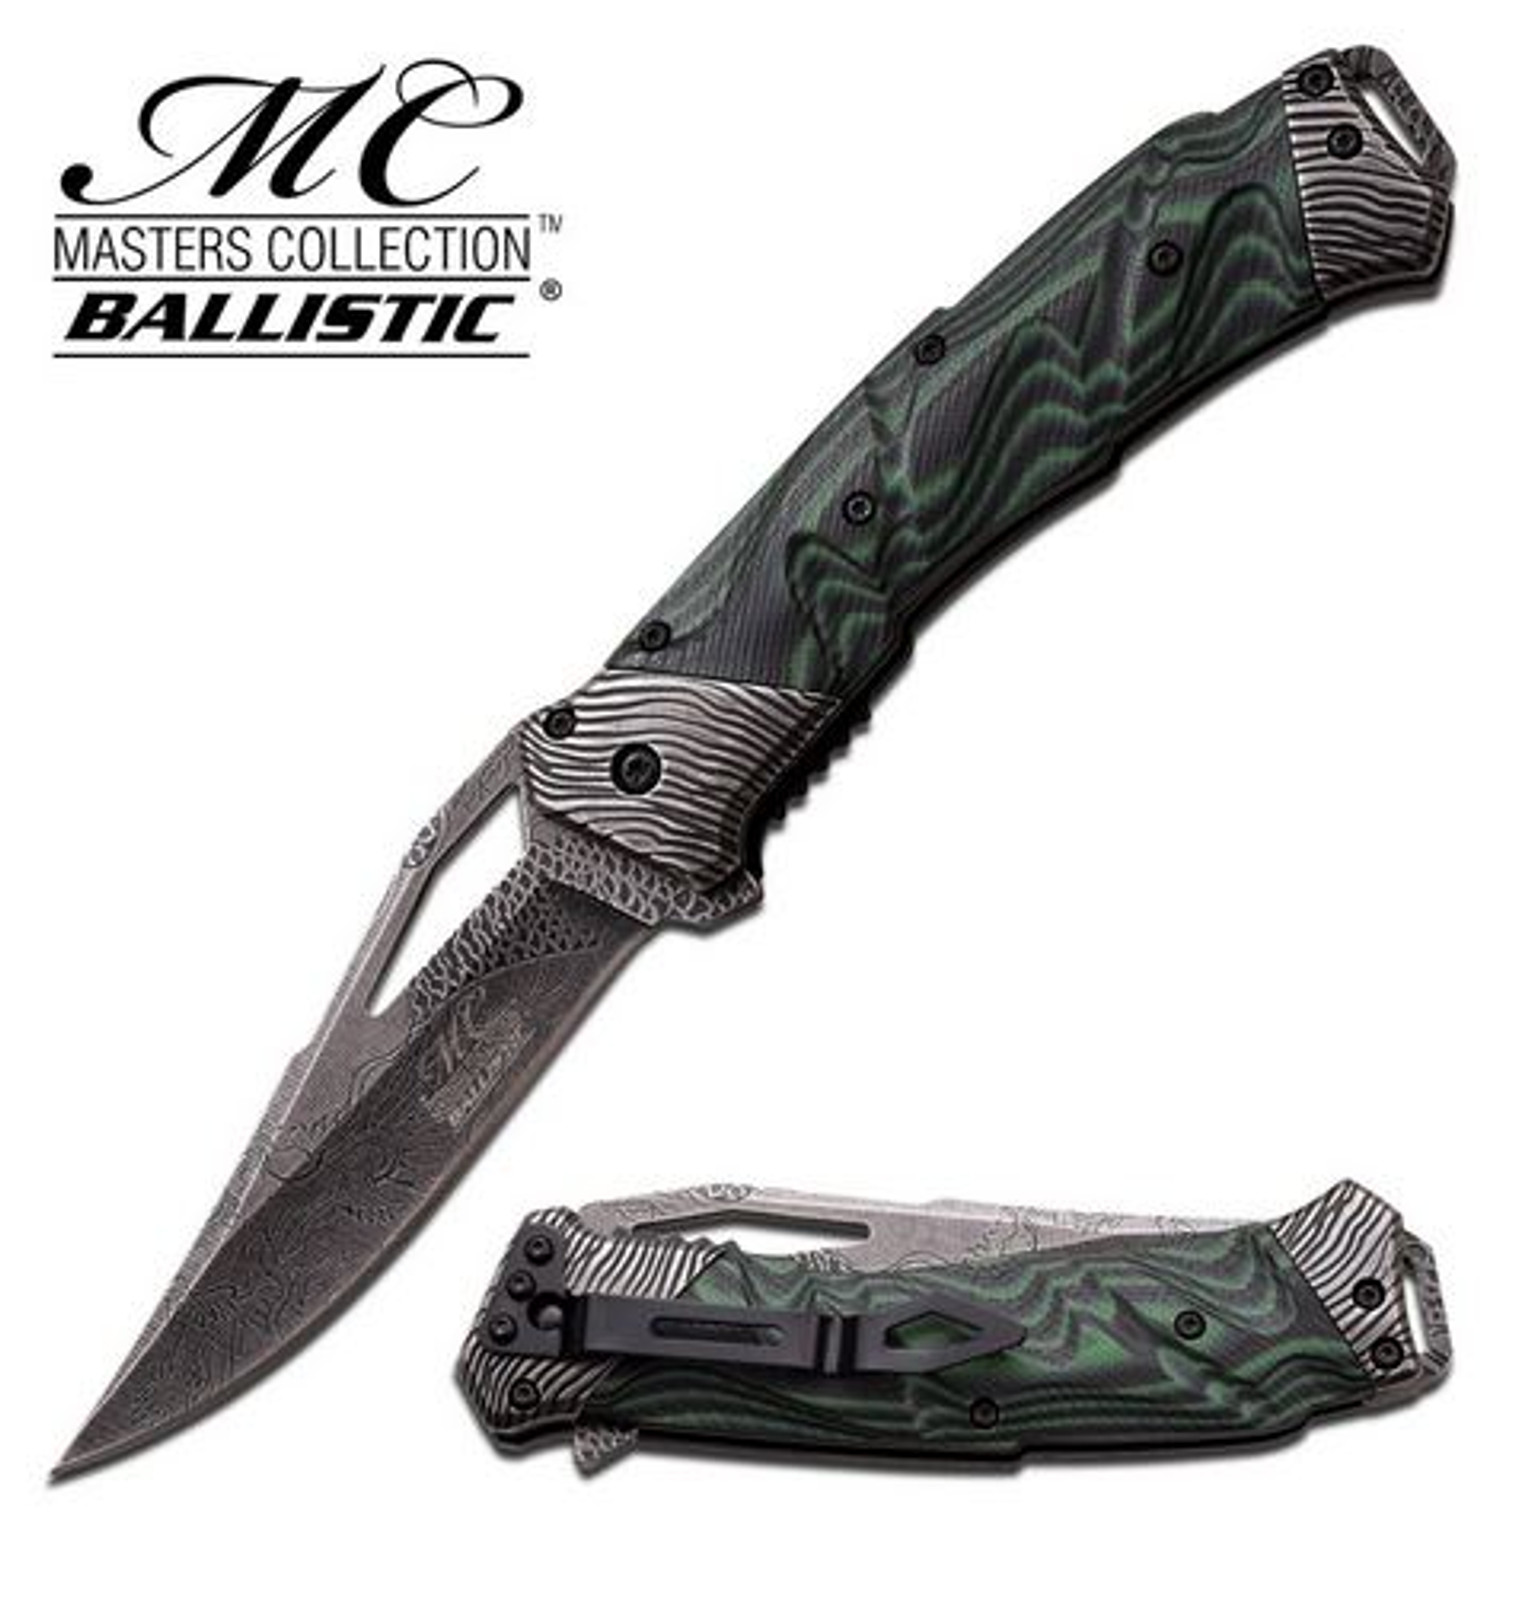 Master Collection A021BG Etched Dragon, Green G-10